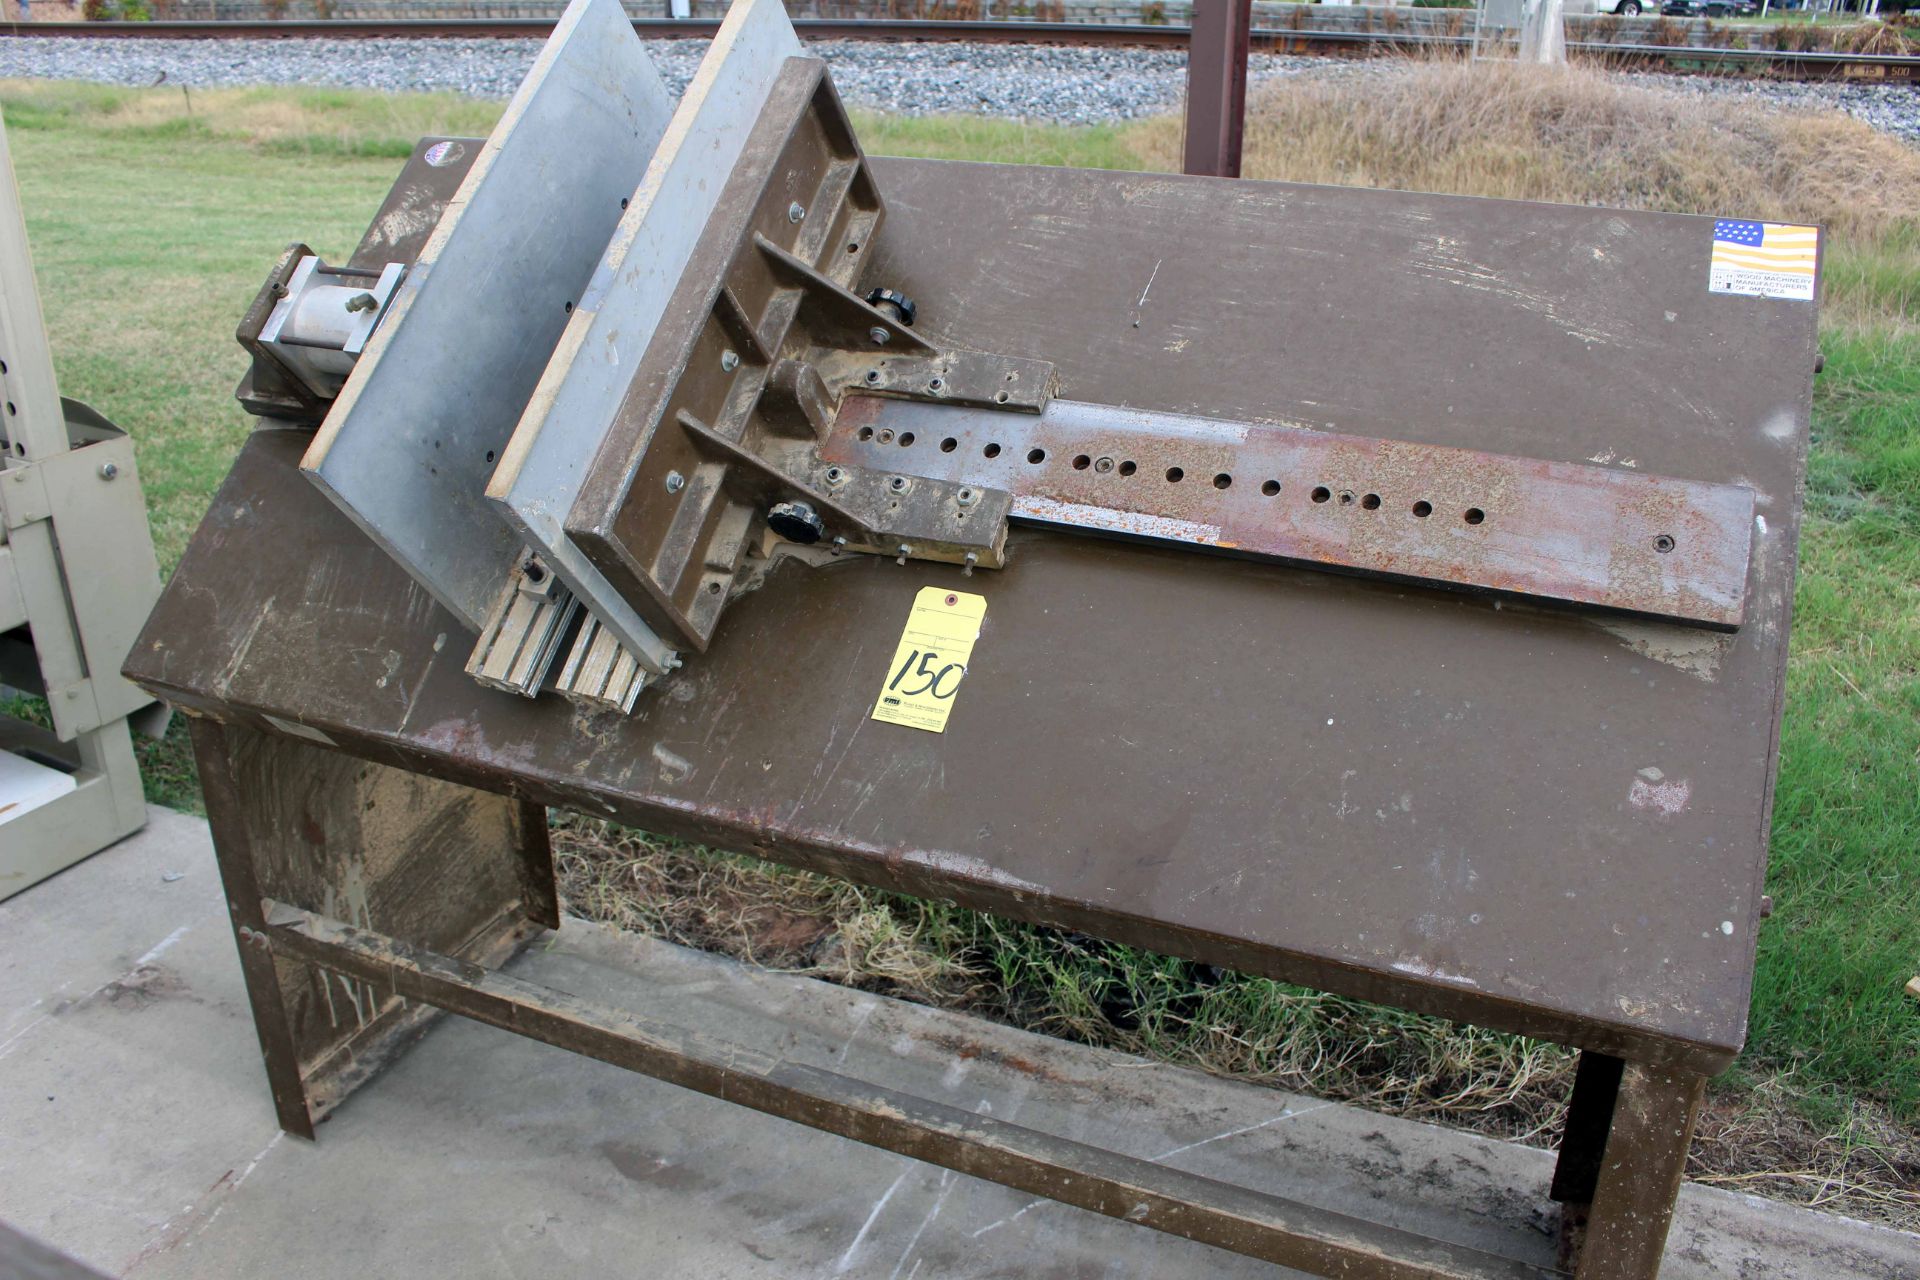 INCLINED BOX CLAMP, RITTER MDL. R-875, new 1996, pneu. pwrd., 36" max. width, assorted panels, S/N